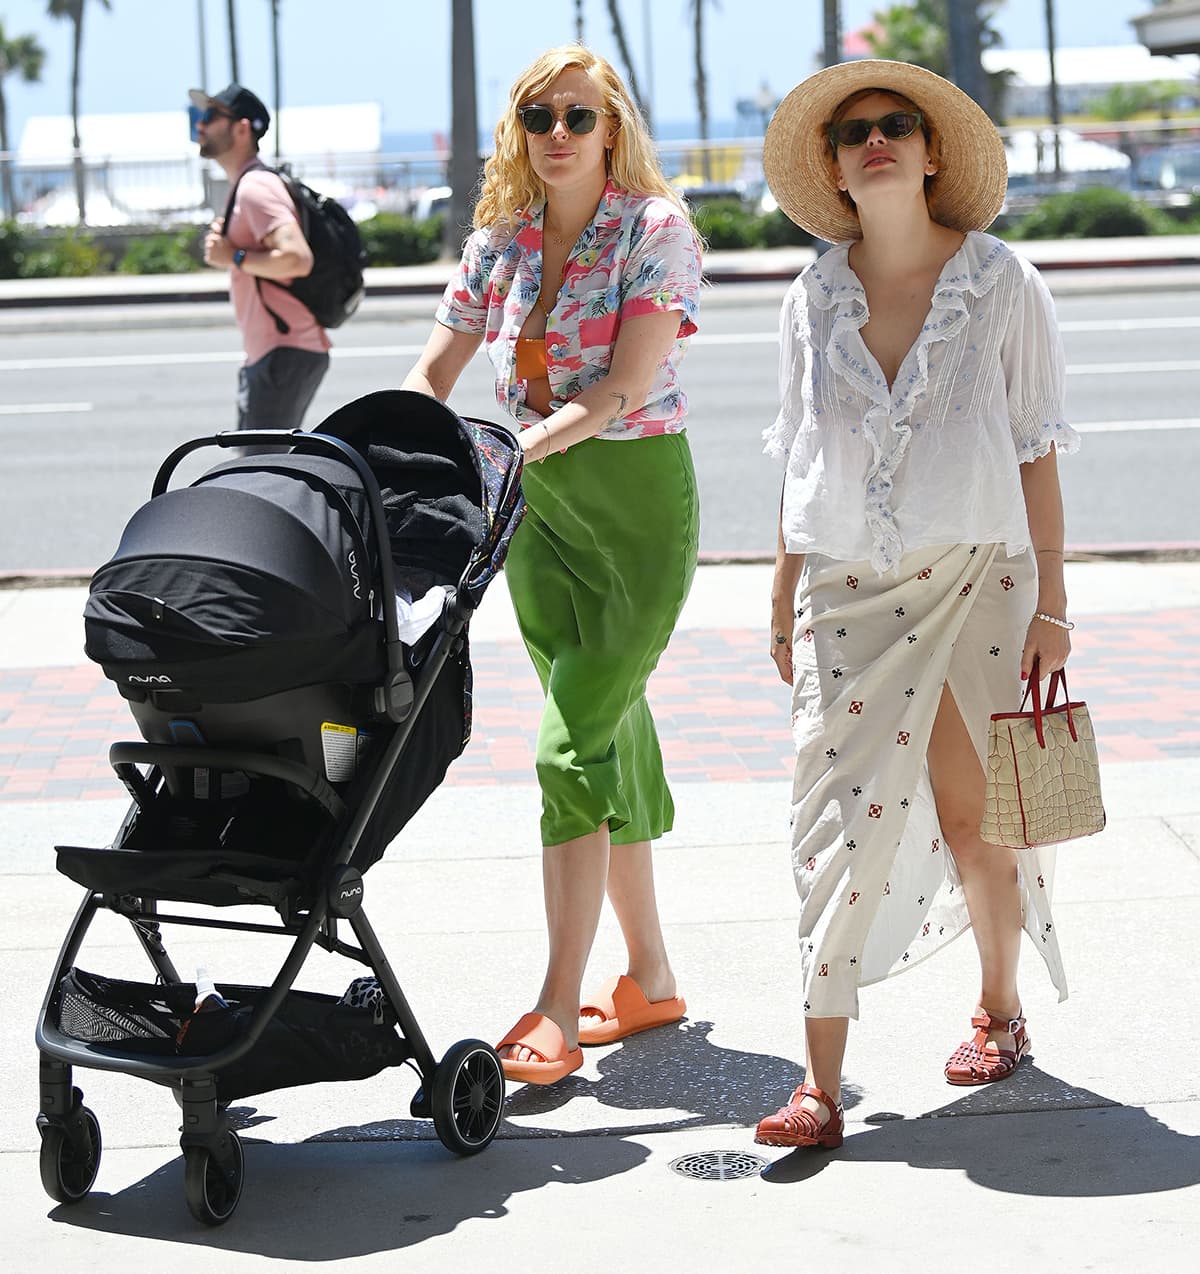 Rumer Willis is joined by her sister Tallulah by the beach both clad in breezy summer outfits